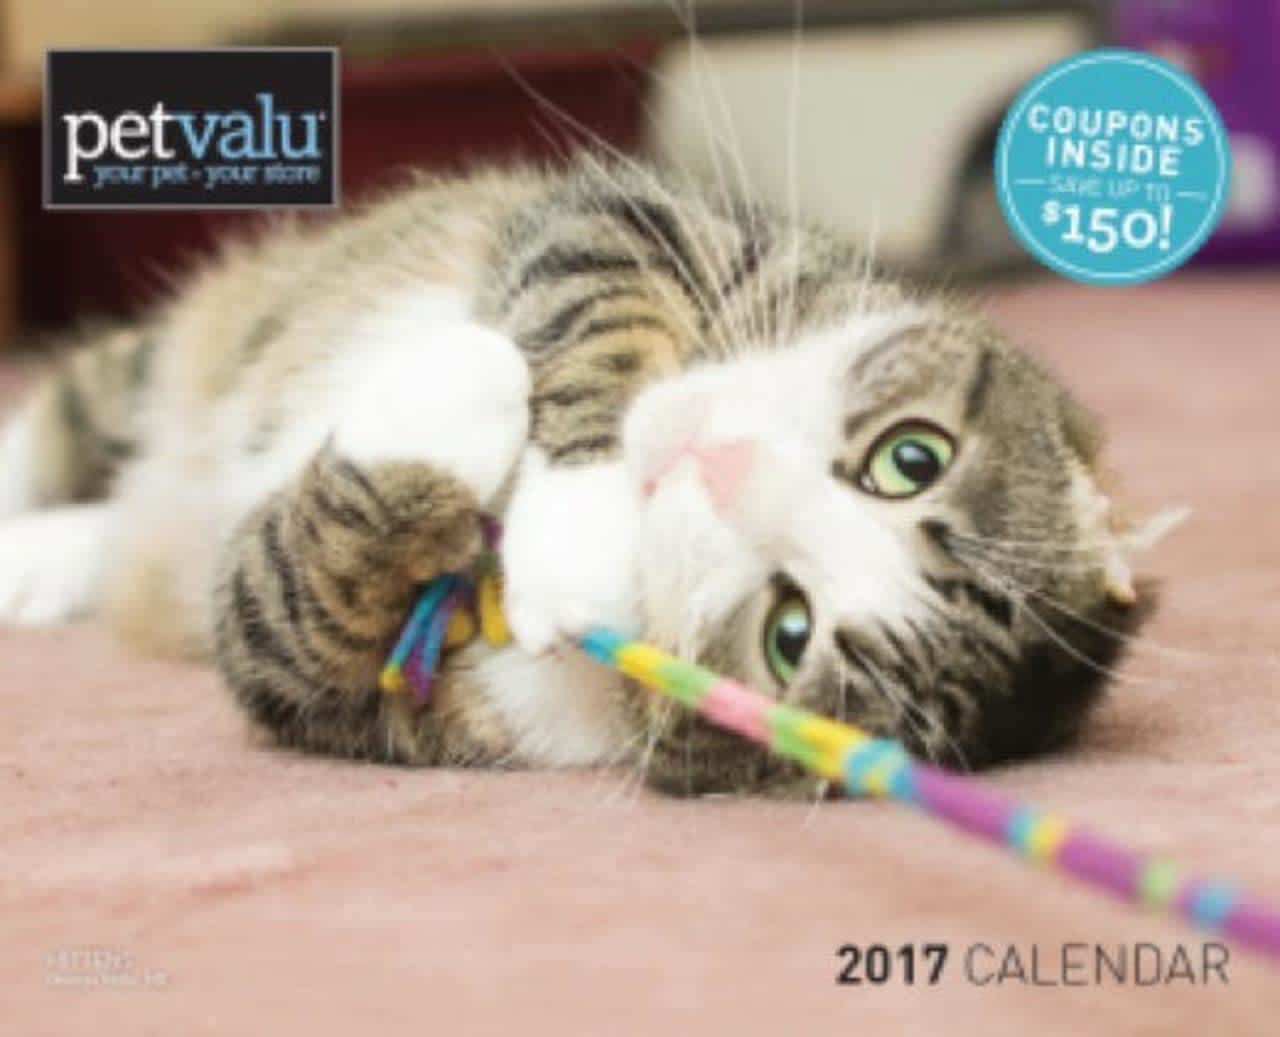 Pet Valu is holding an open casting call for pets for its annual calendar.